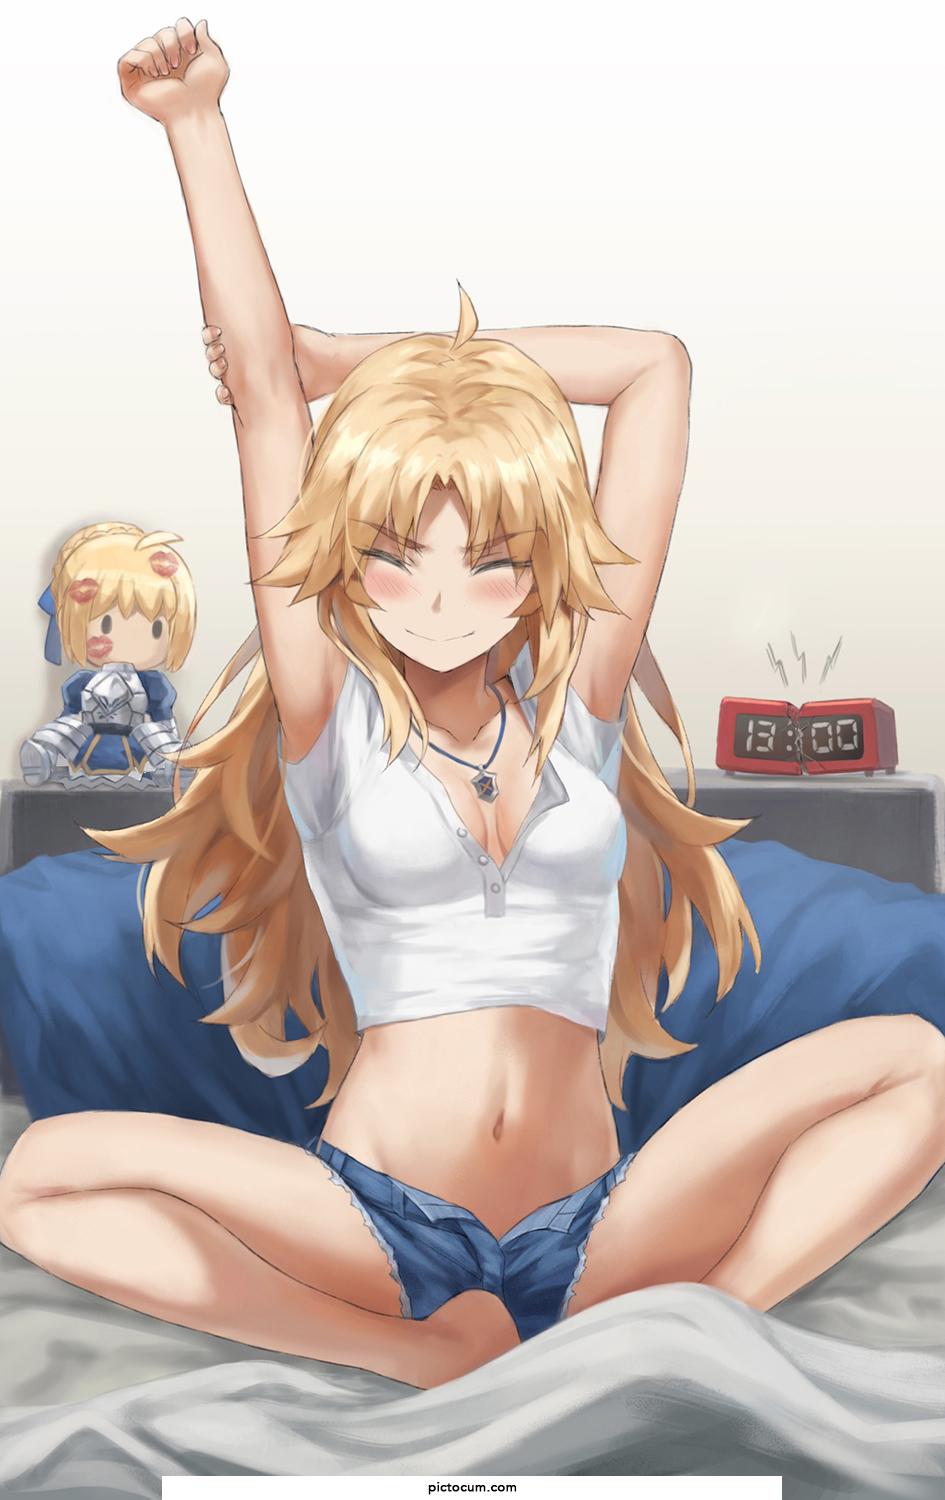 Mordred waking up